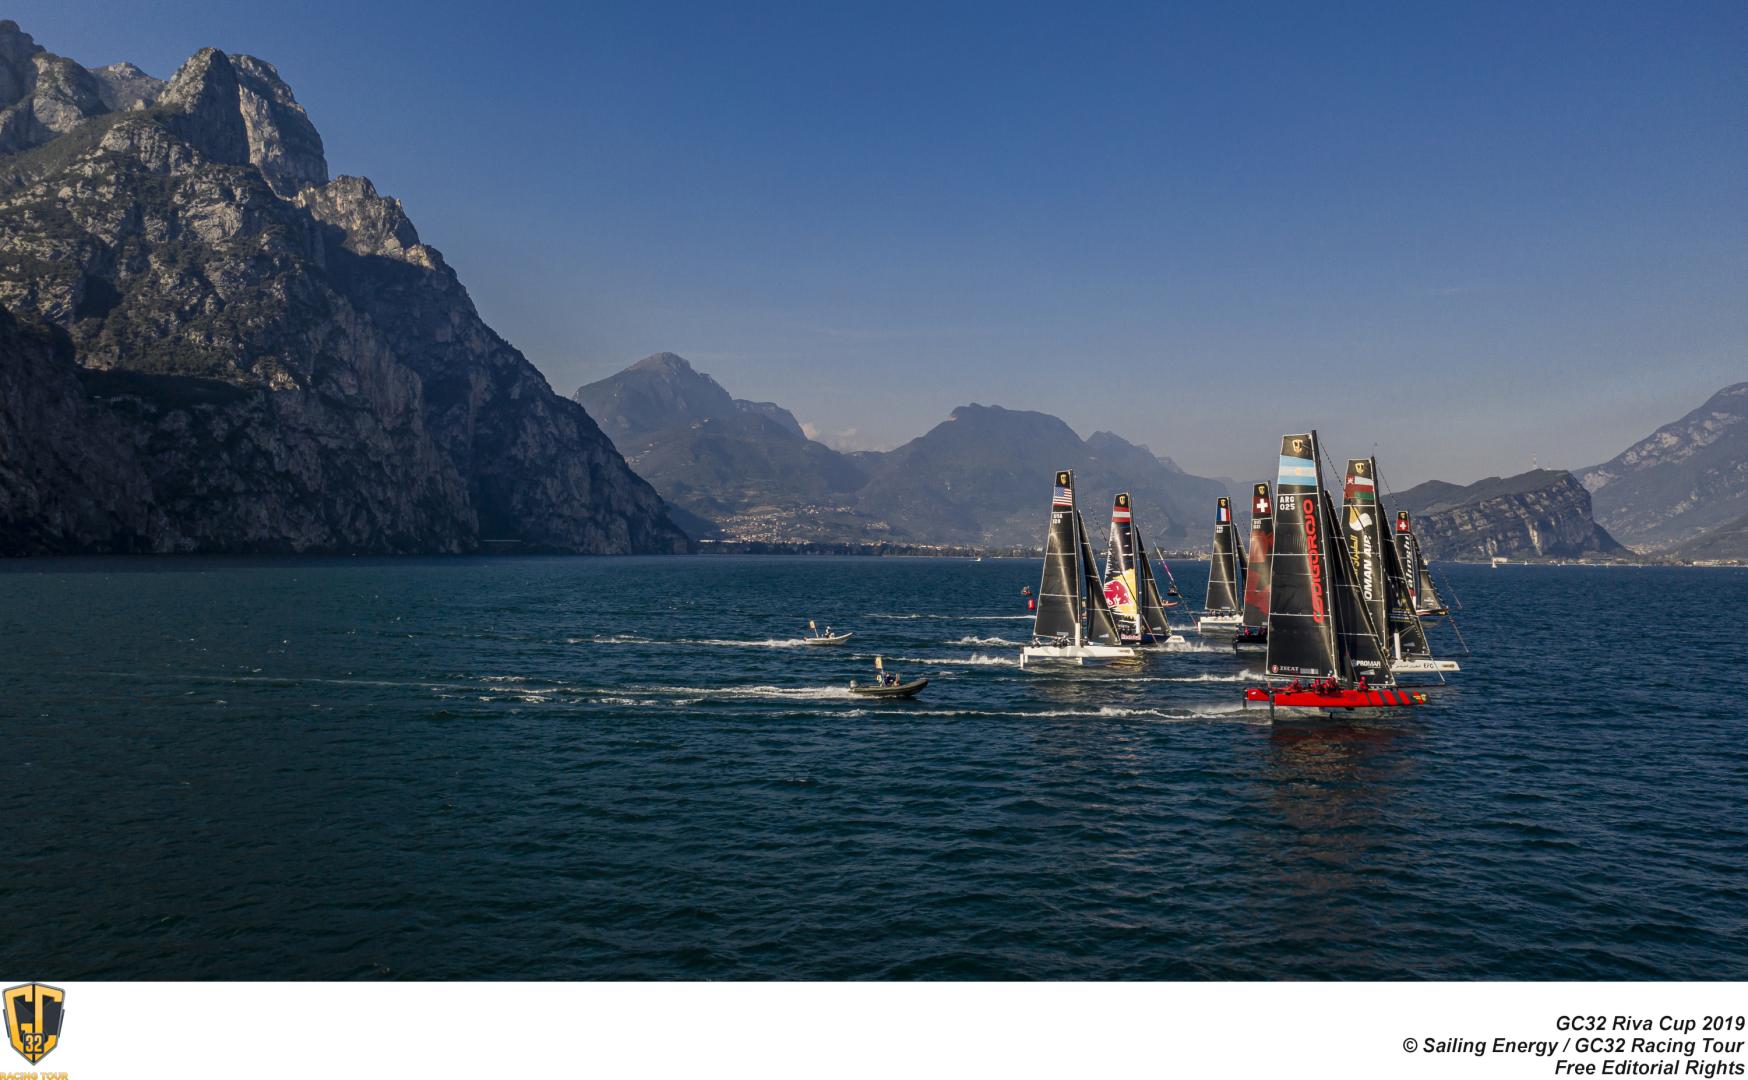 GC32 Racing Tour: Oman Air fights back at GC32 Riva Cup